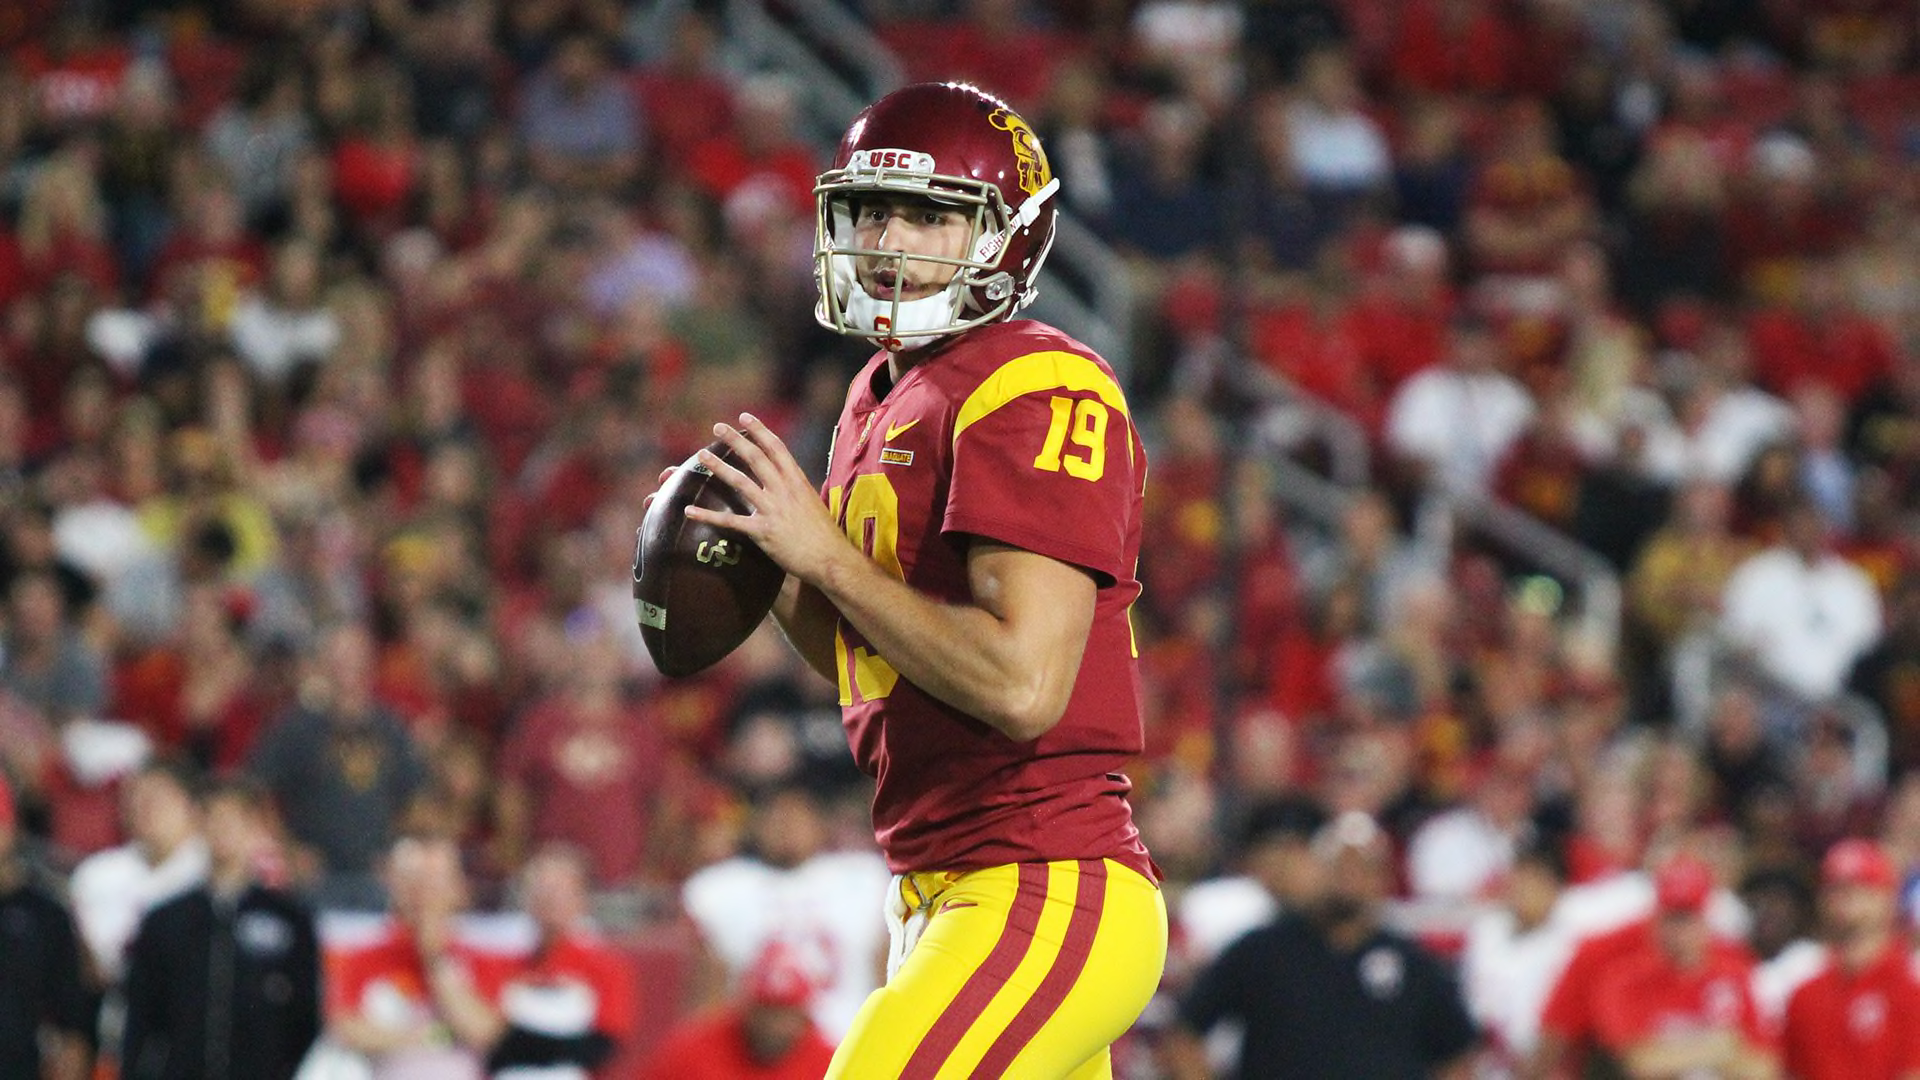 USC vs. Washington preview 2019: Which units have the edge?